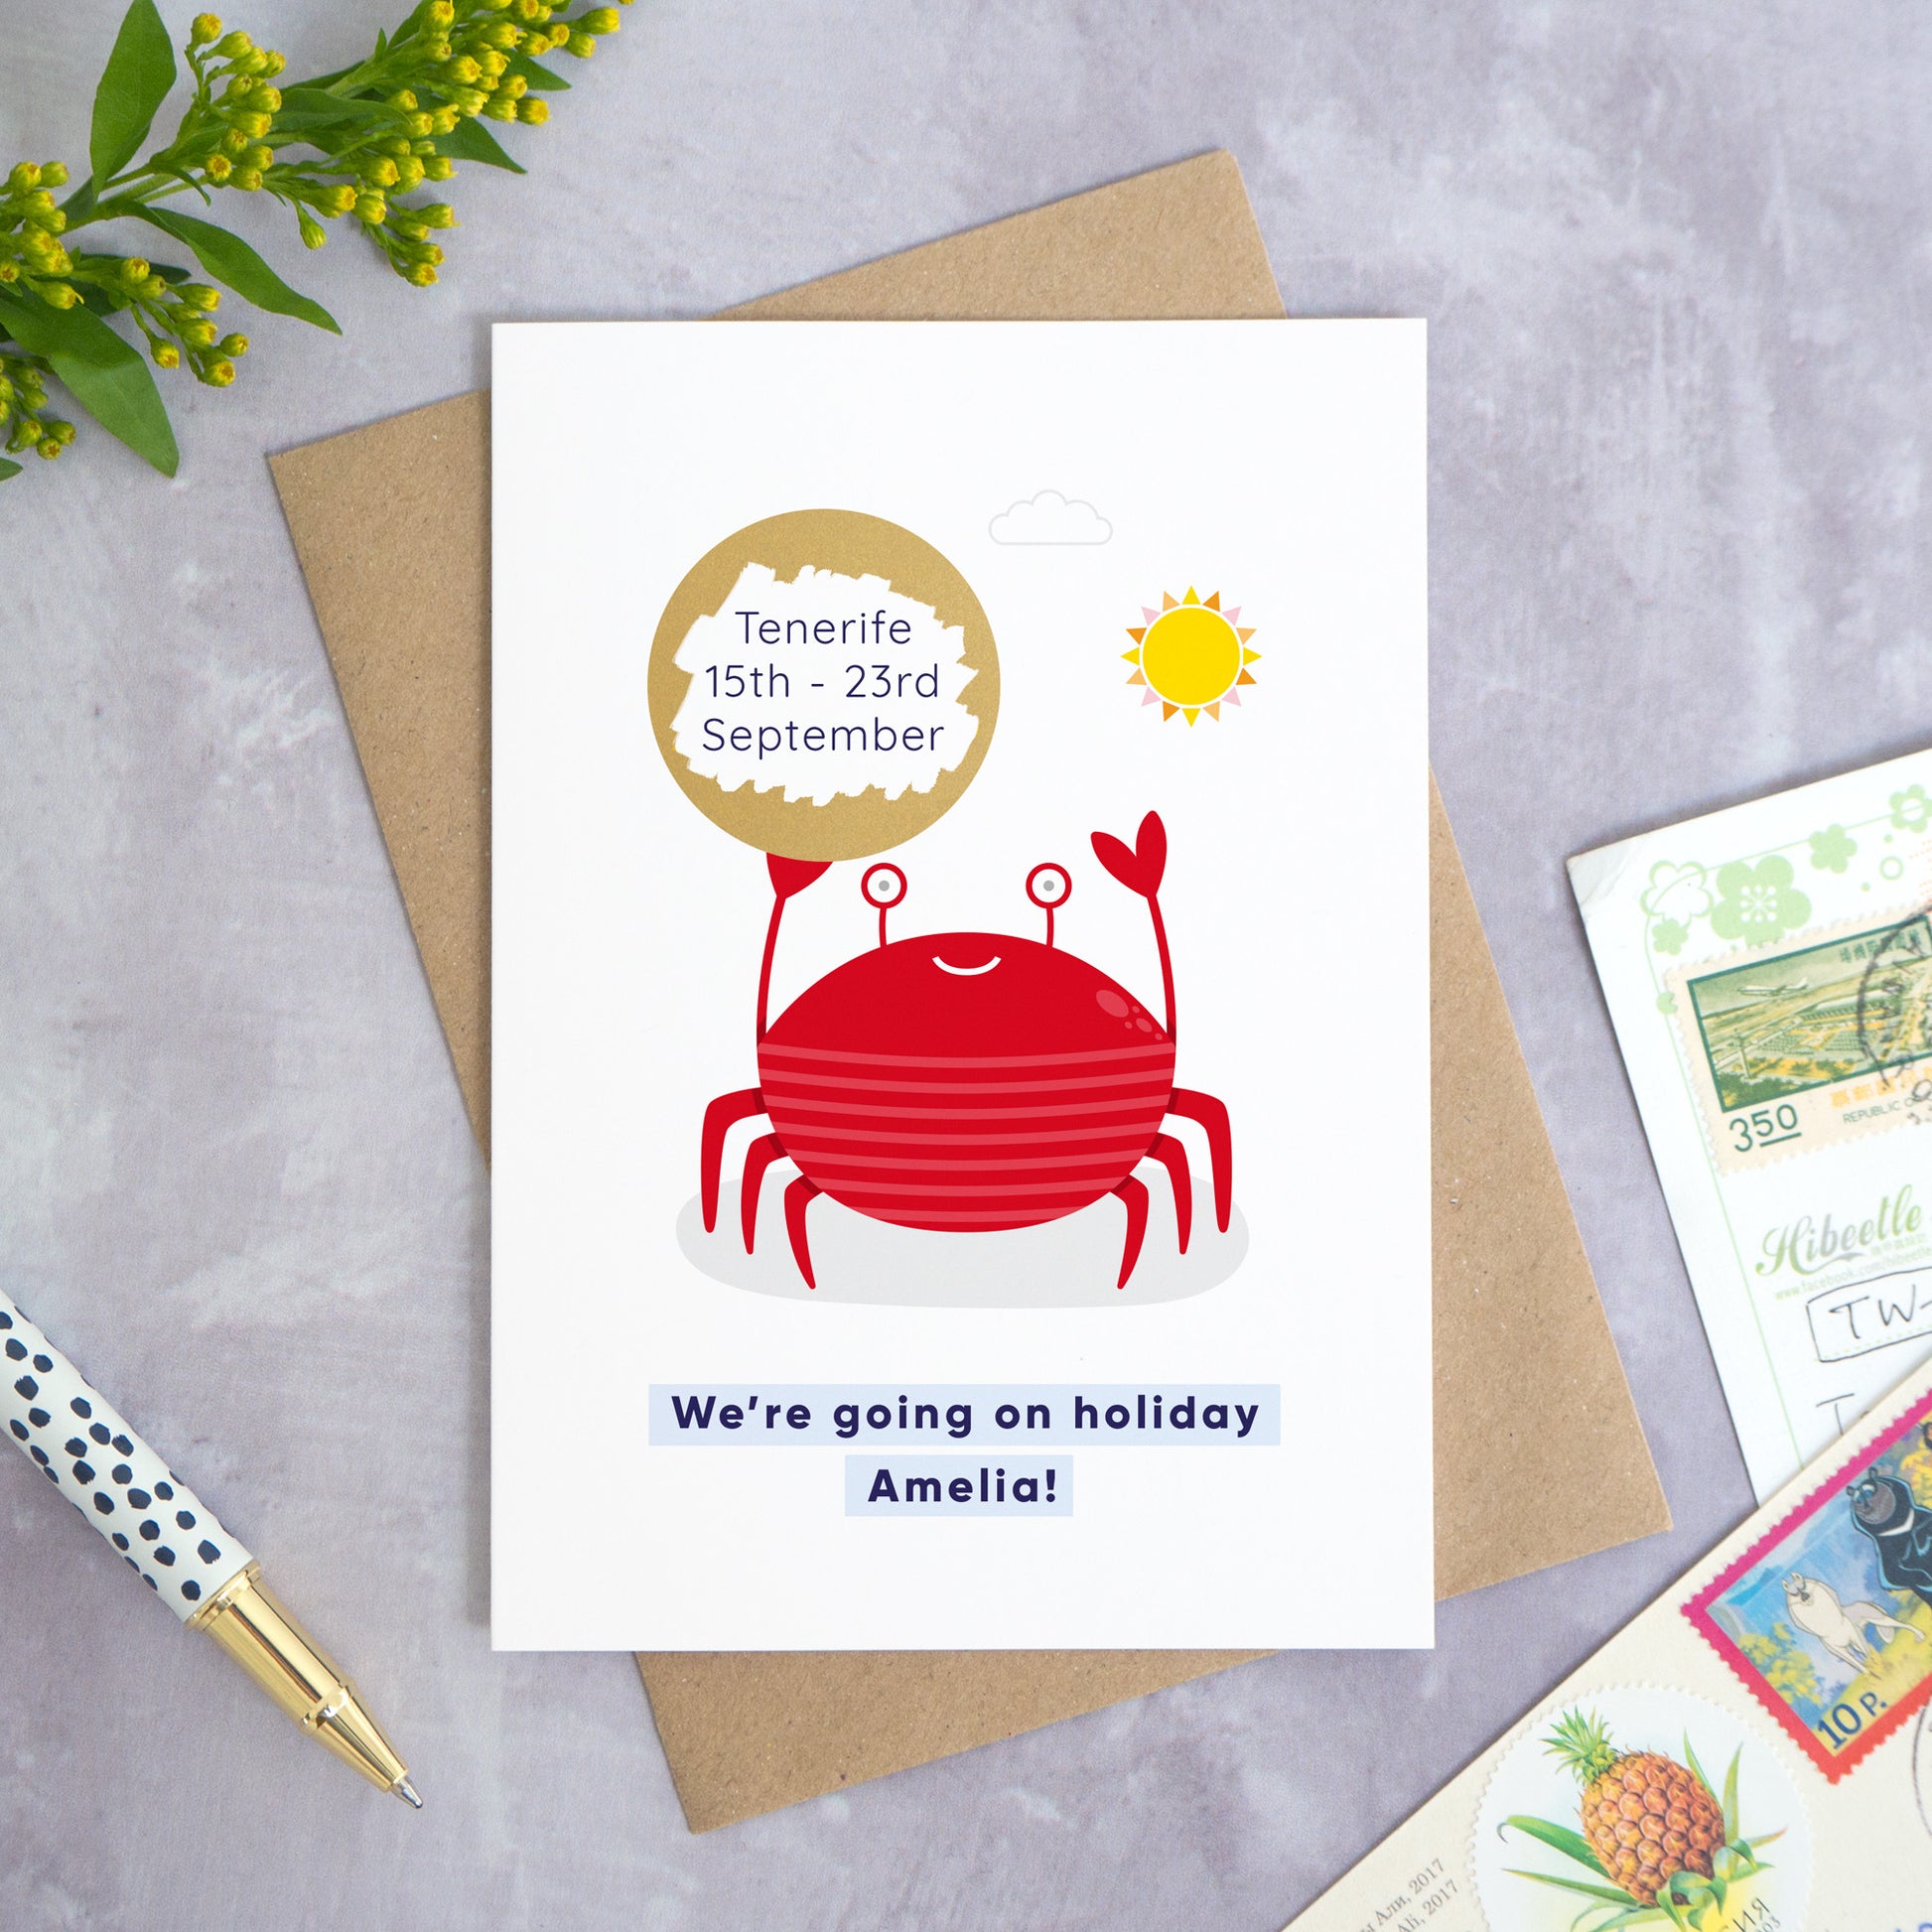 A seaside holiday reveal scratch card featuring a friendly red crab holding the scratch panel. The gold panel has been scratched off to reveal the holiday destination. Beneath the crab illustration the text reads: “we’re going on holiday Amelia”. This card has been shot on a grey background with a pen and foliage.